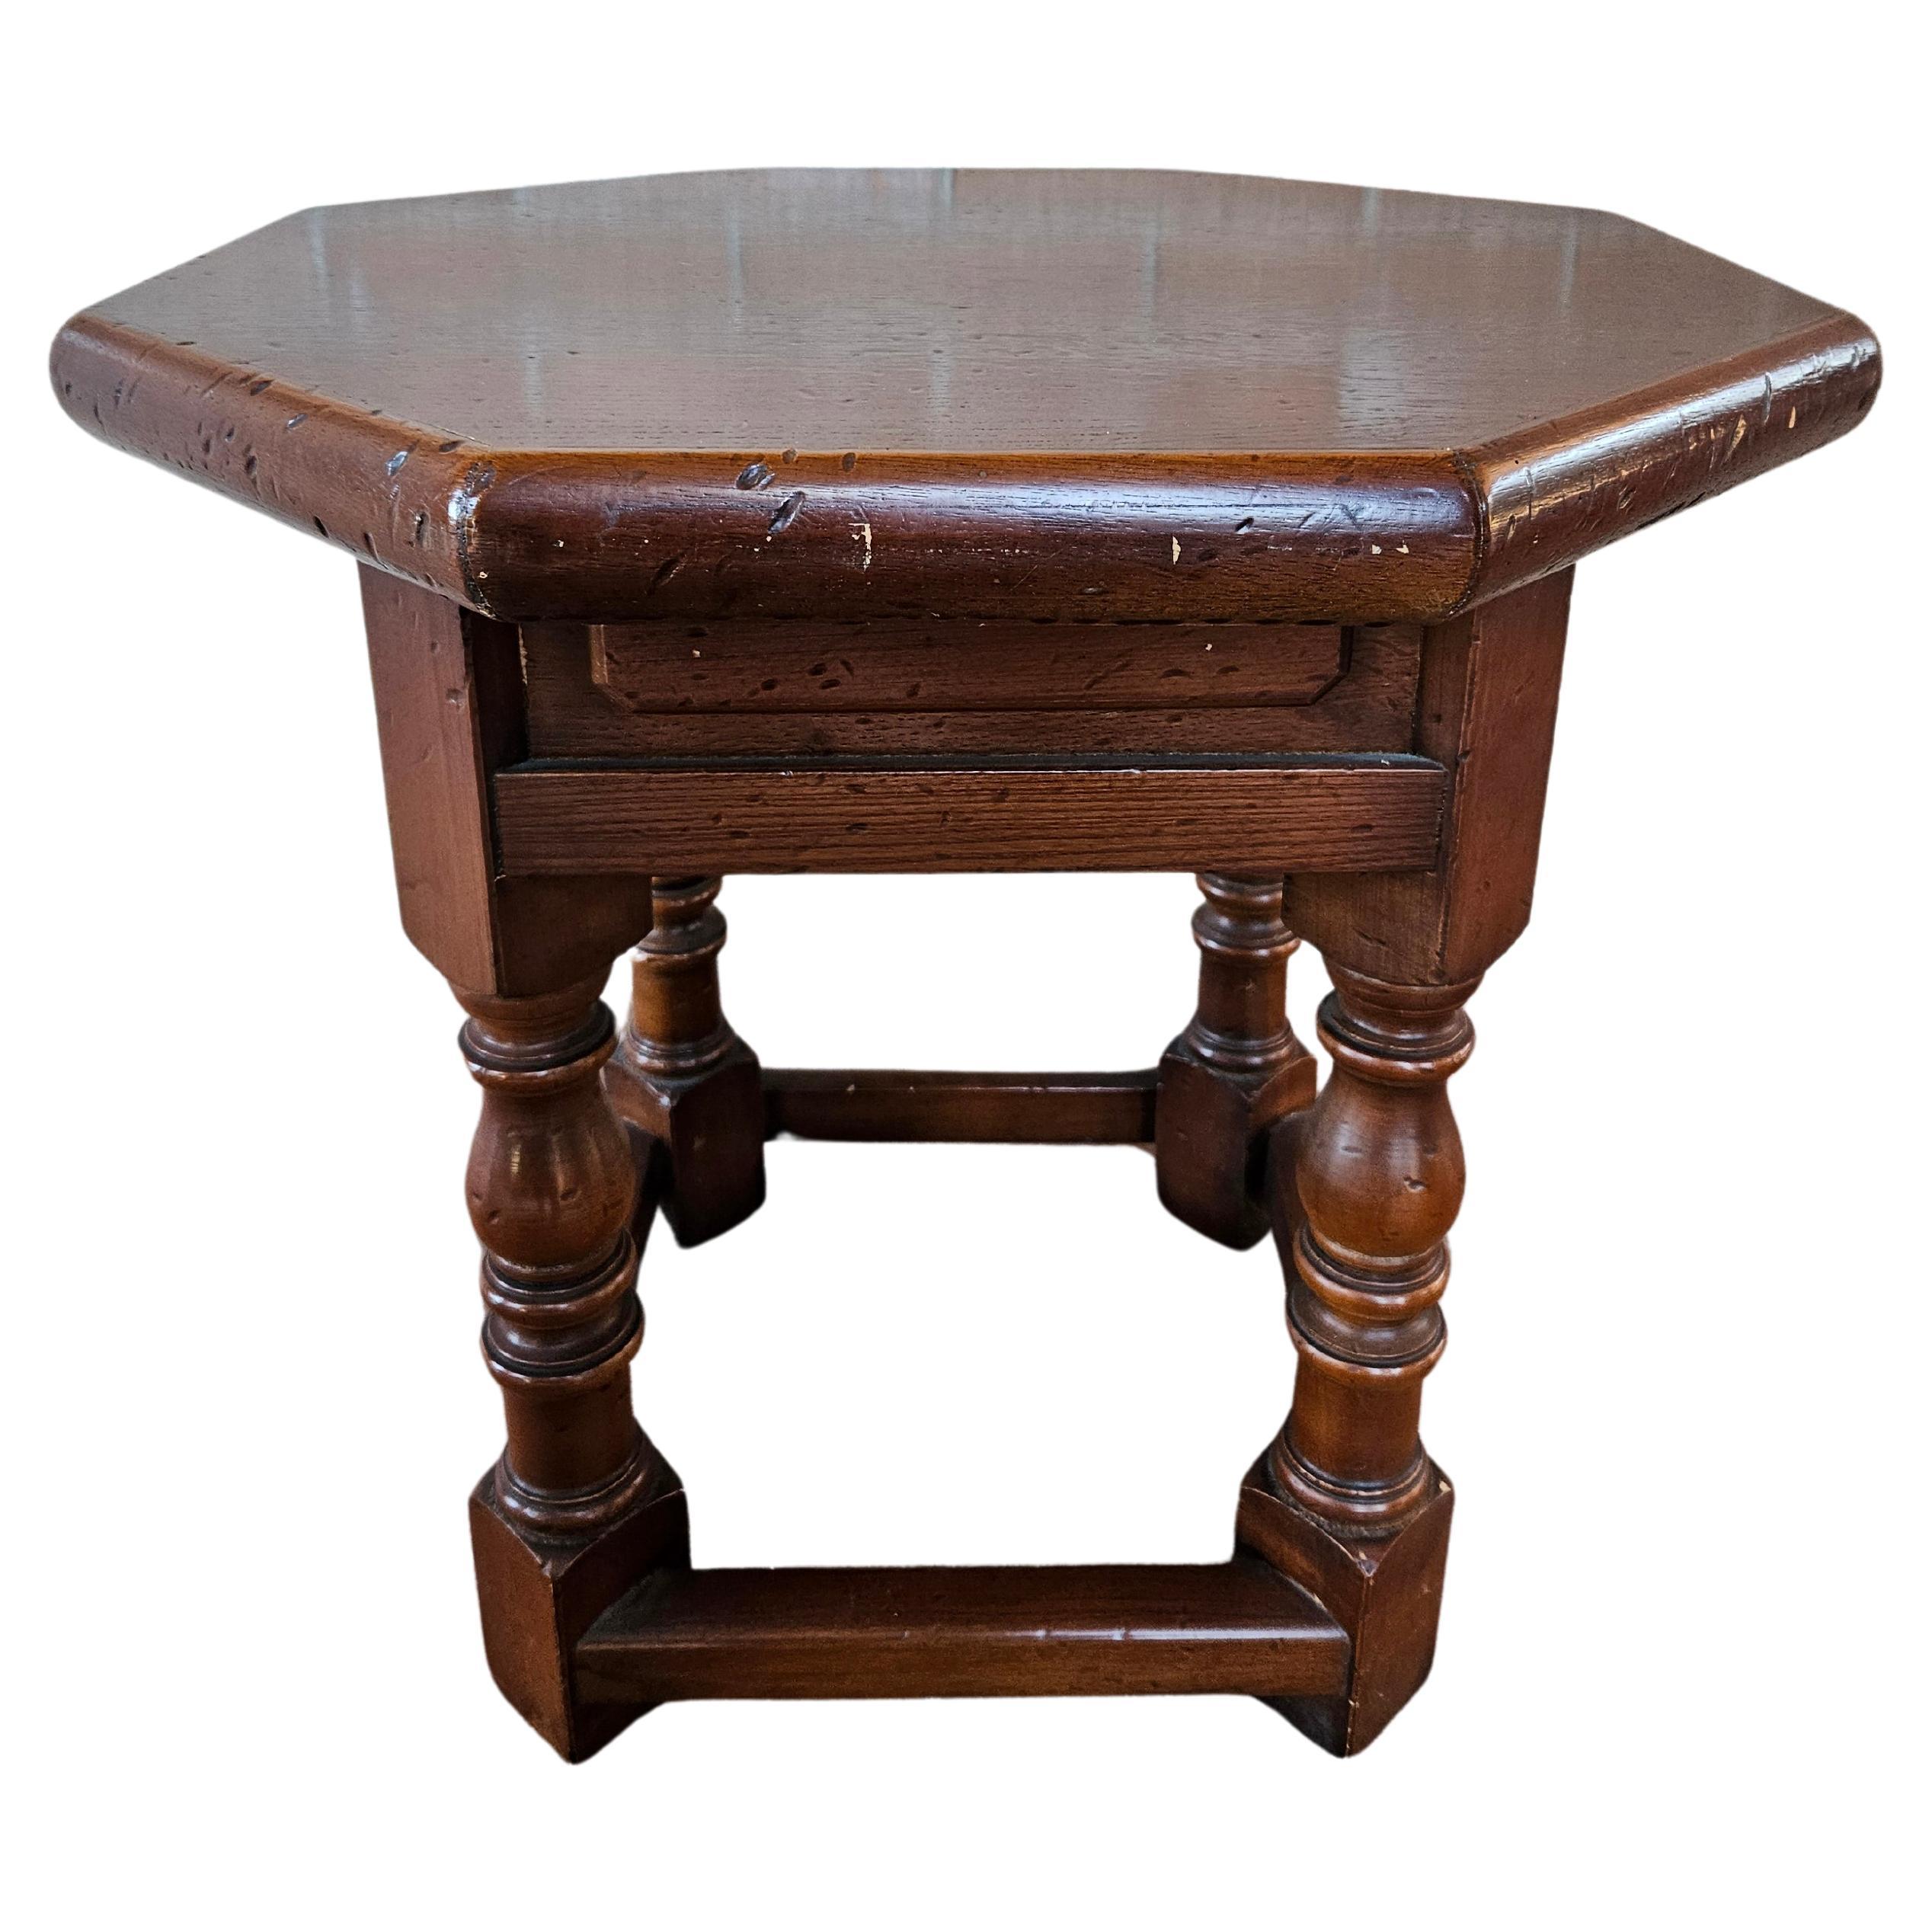 Small octagonal wooden coffee table 20th century For Sale